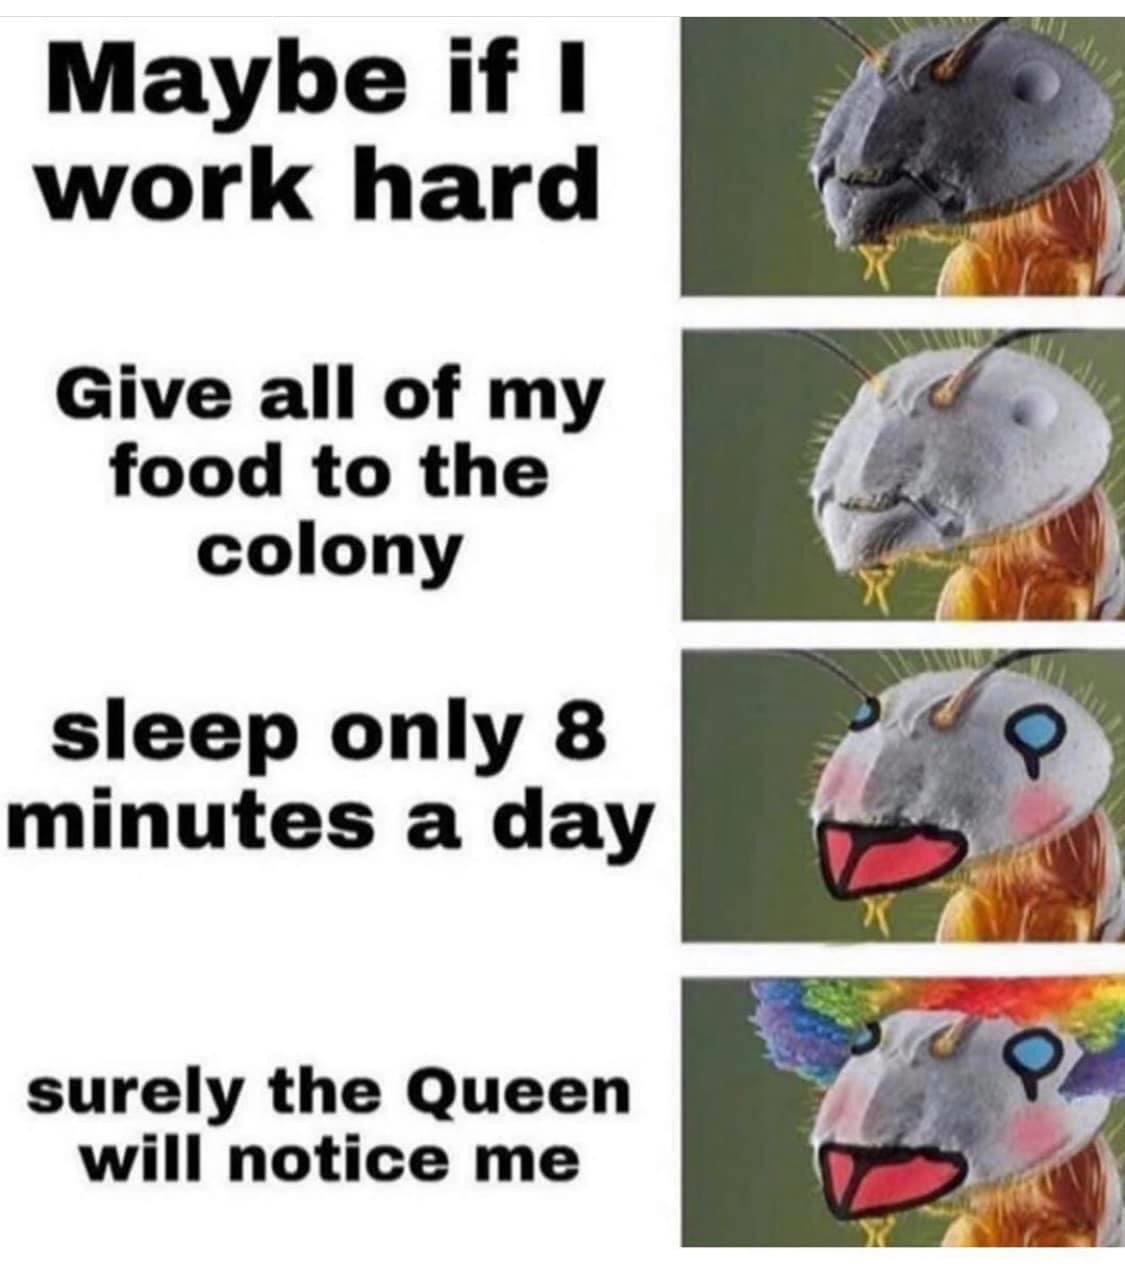 ant meme - Maybe if I work hard Give all of my food to the colony sleep only 8 minutes a day surely the Queen will notice me